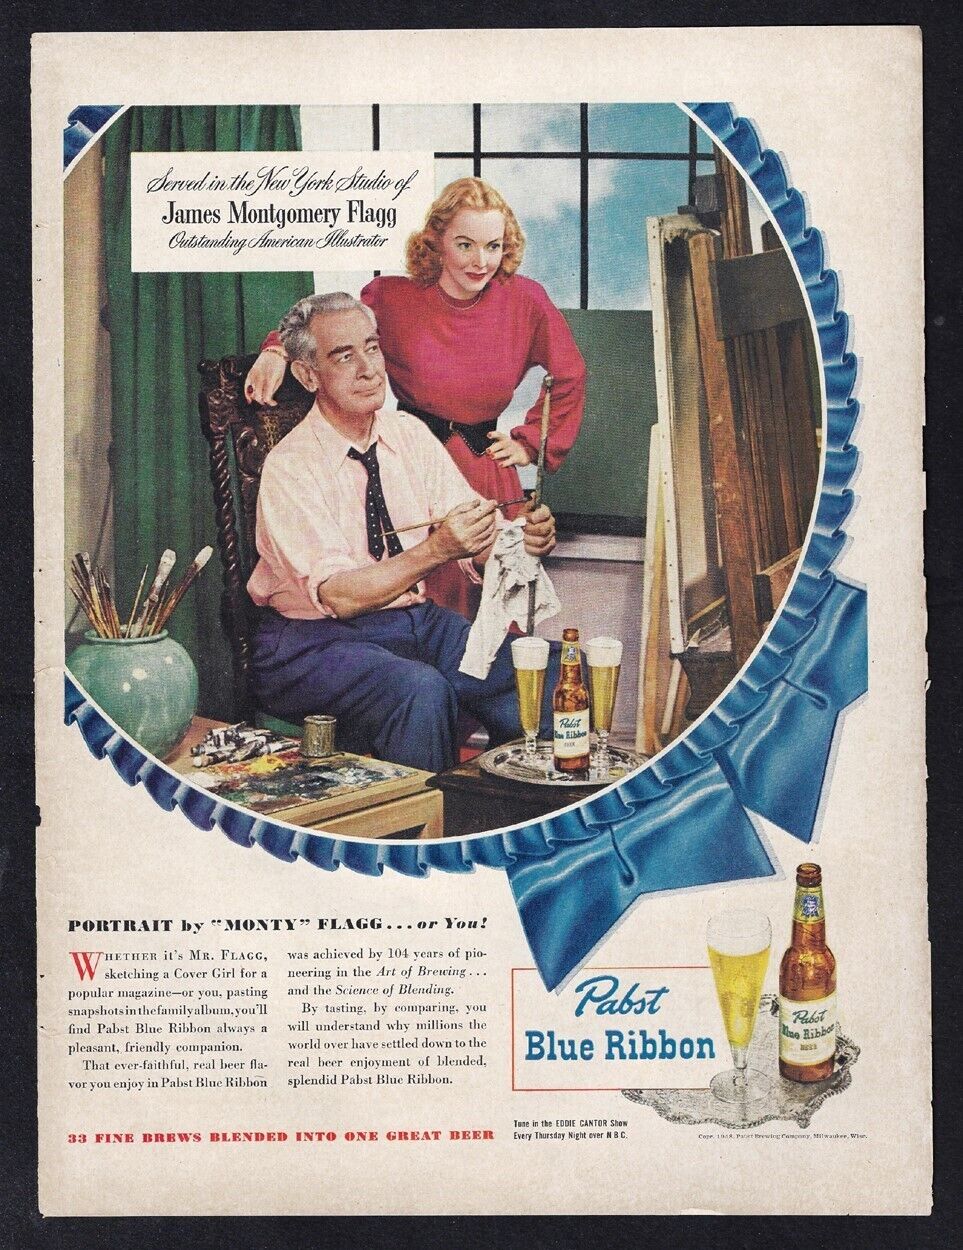 1948 PABST BLUE RIBBON Beer Ad - Endorsed by Illustrator James Montgomery Flagg